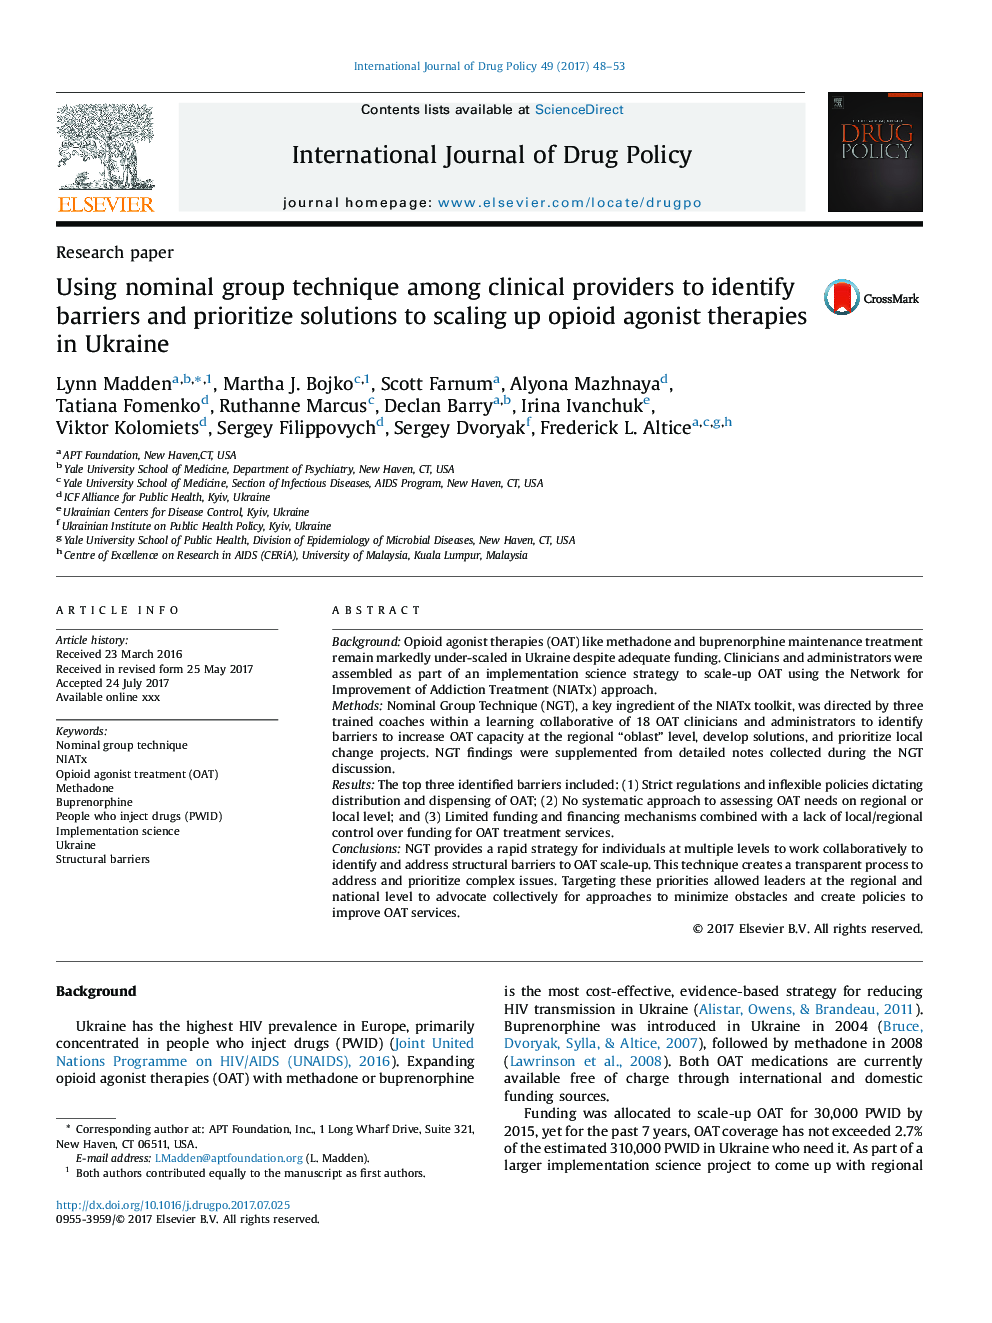 Using nominal group technique among clinical providers to identify barriers and prioritize solutions to scaling up opioid agonist therapies in Ukraine